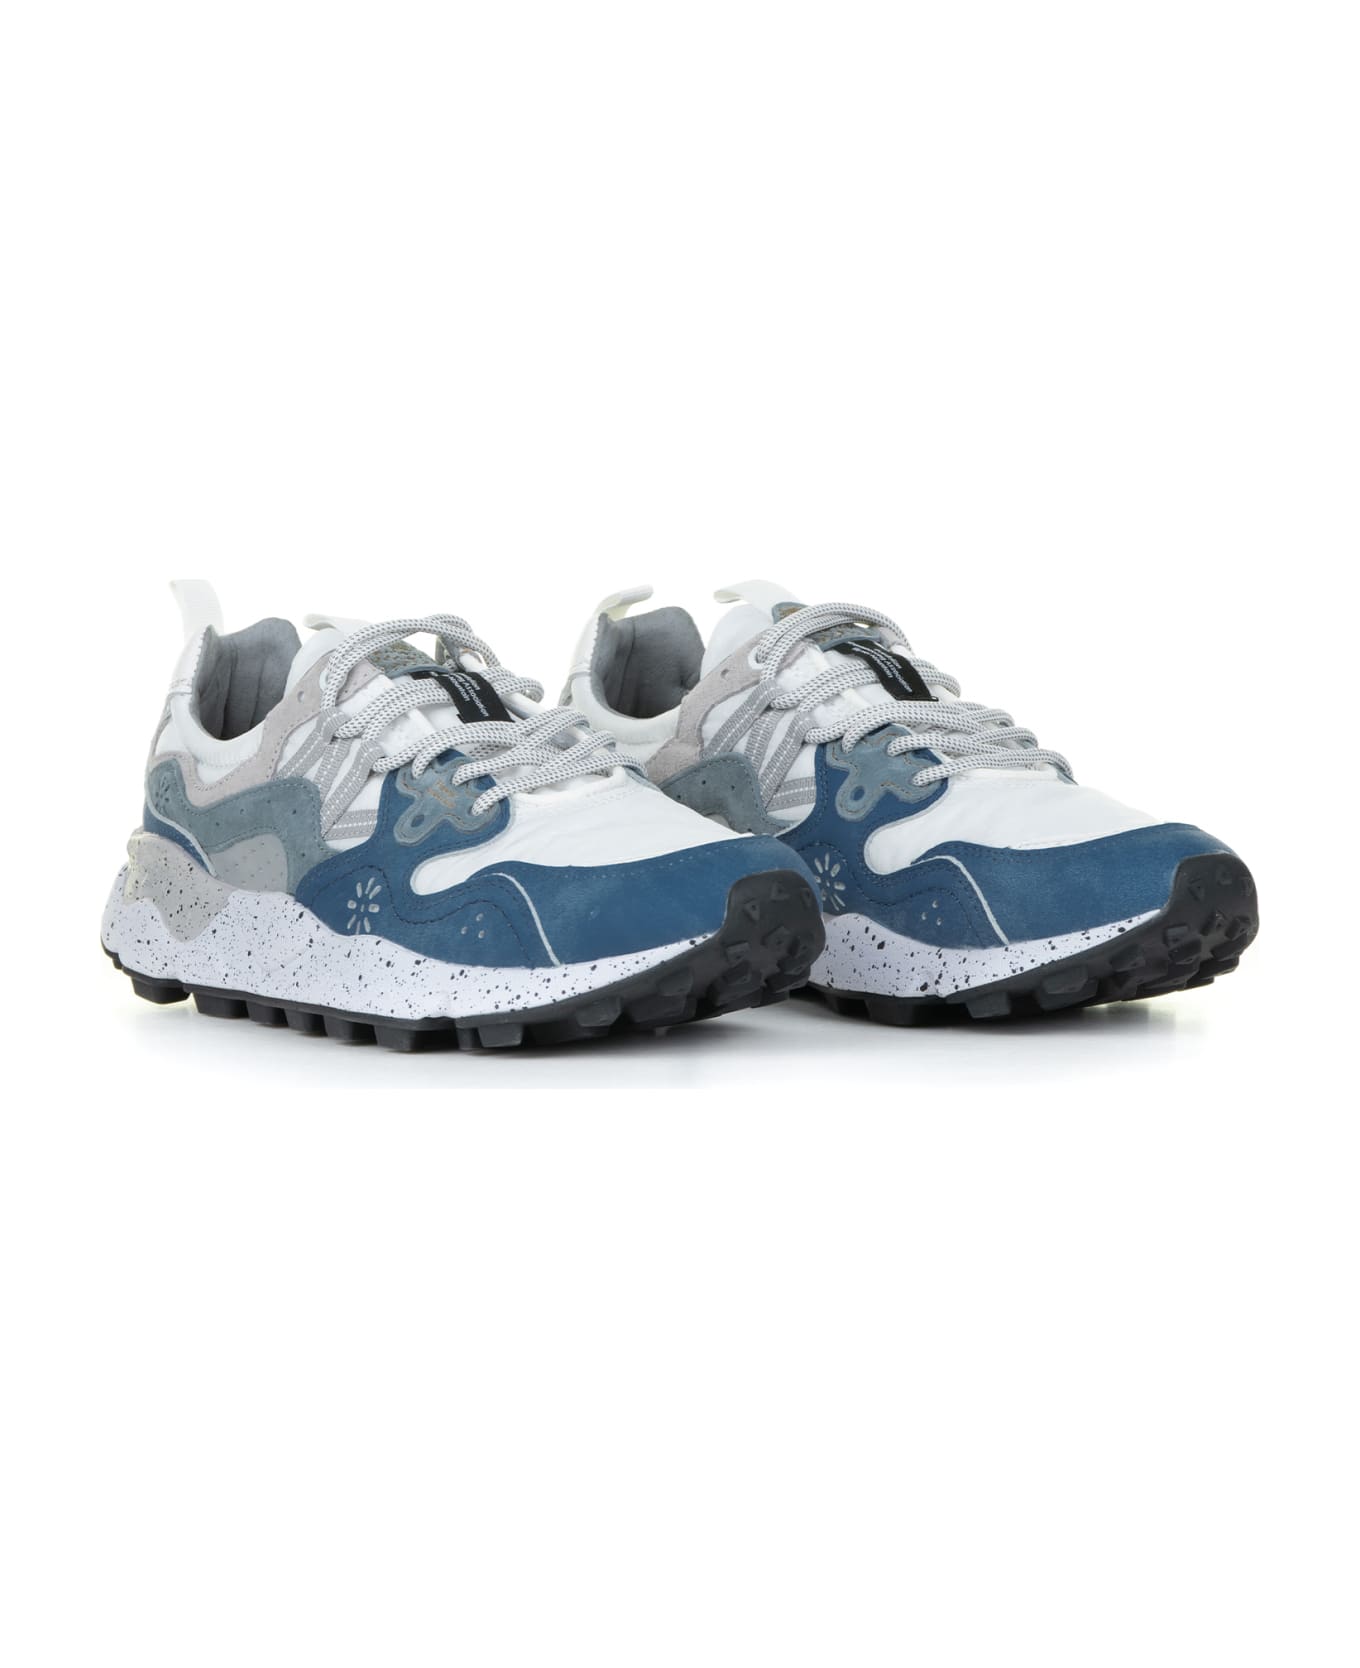 Flower Mountain Yamano Blue White Sneakers In Suede And Nylon - ATLANTIC WHITE